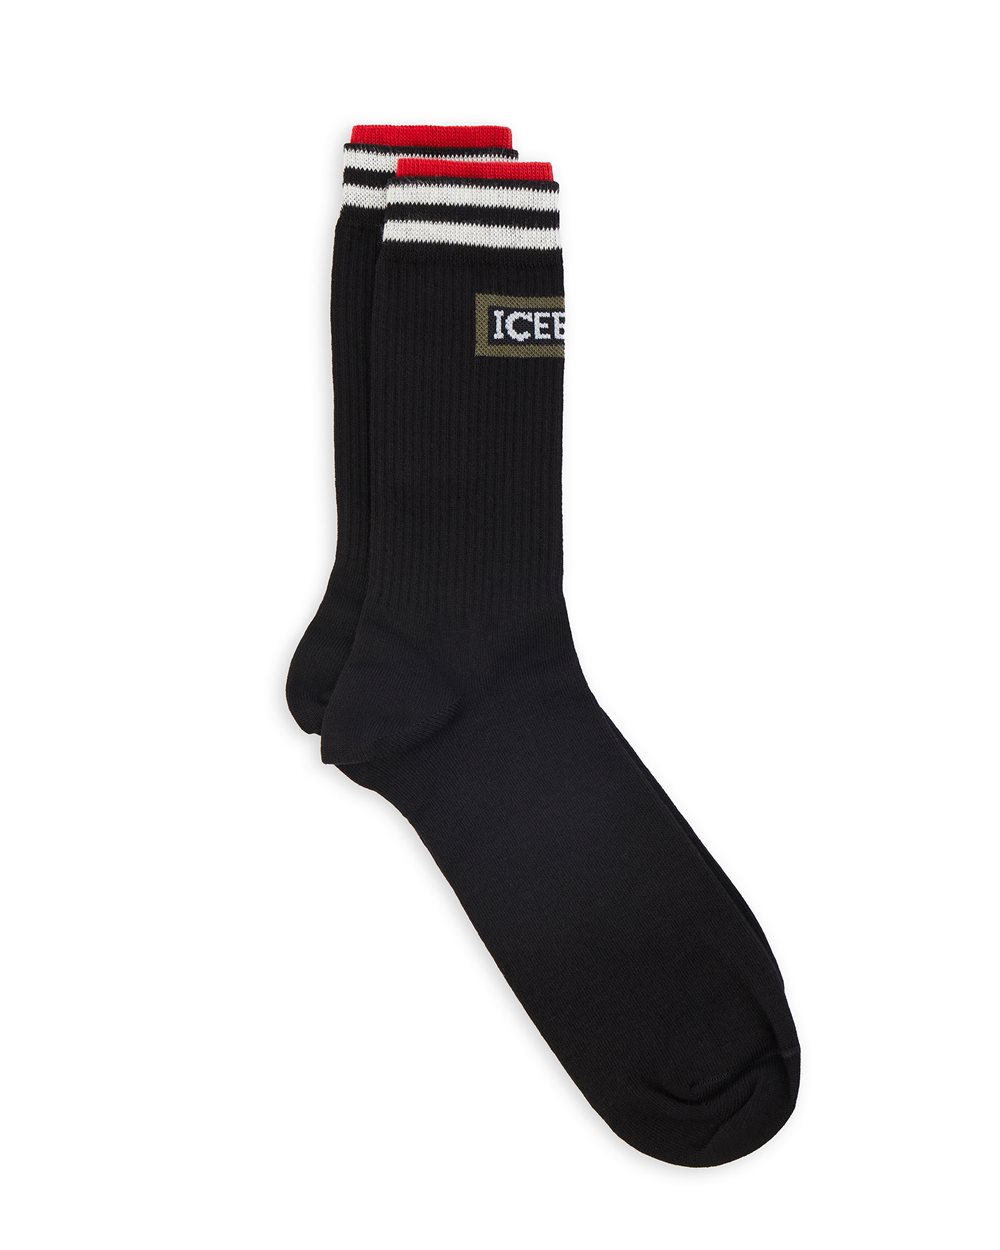 Cotton socks with logo - carosello HP man accessories | Iceberg - Official Website